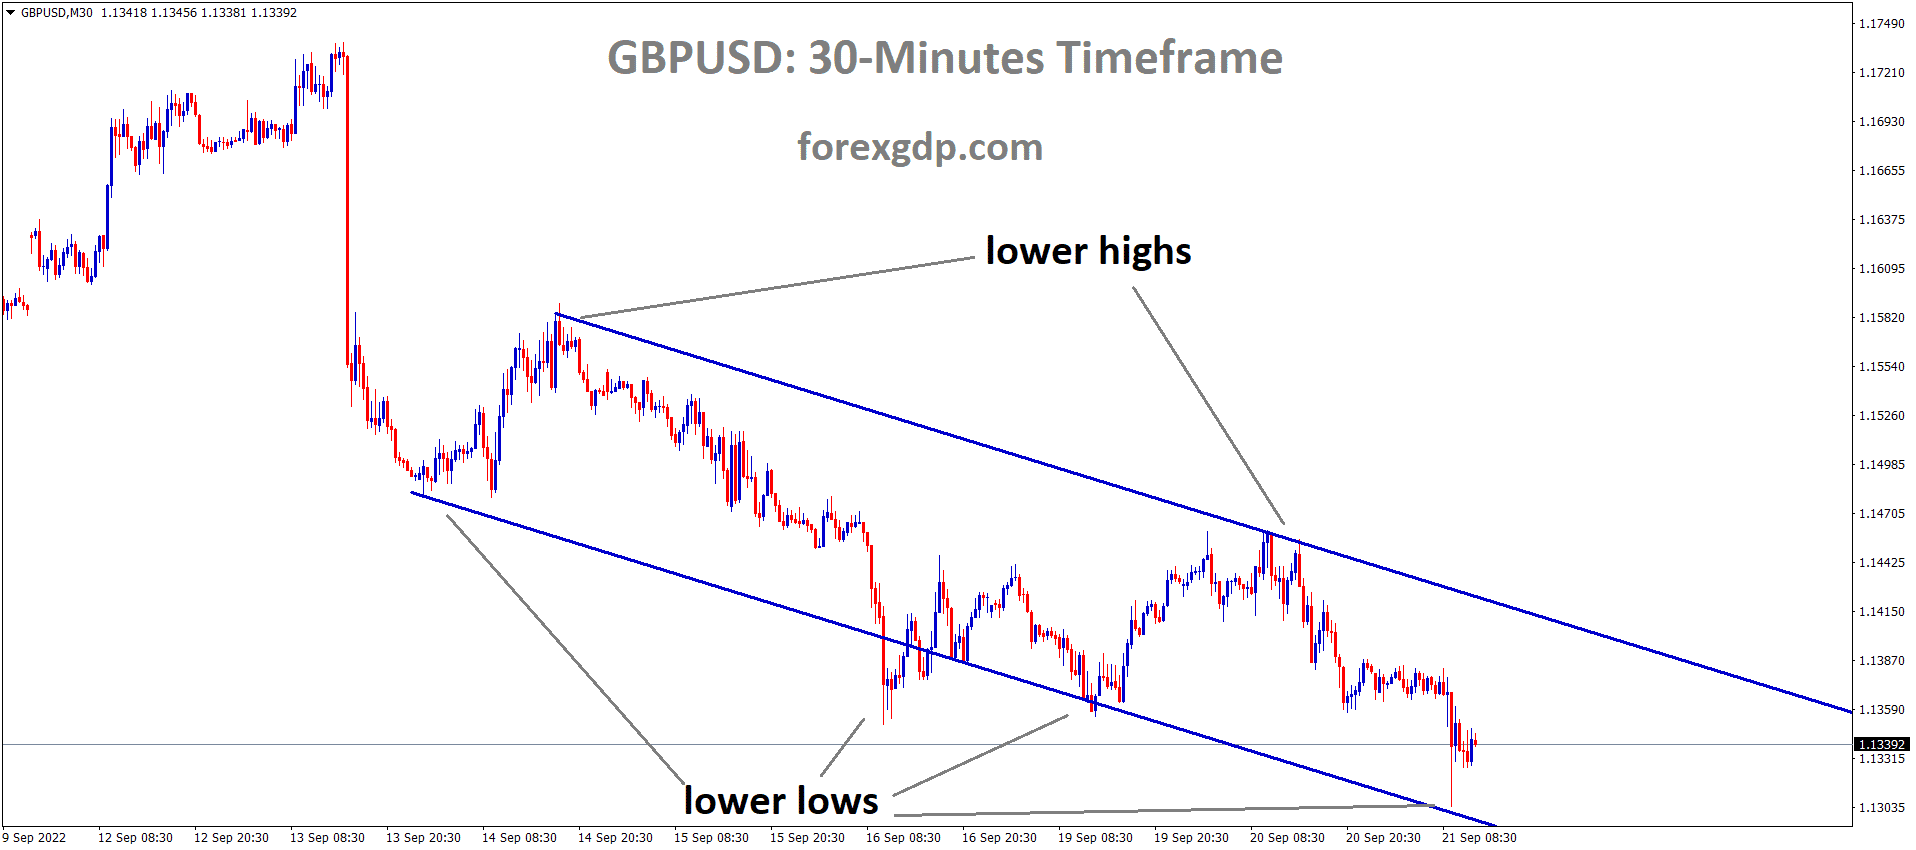 GBPUSD is moving in the descending channel and the market has rebounded from the lower low area of the channel